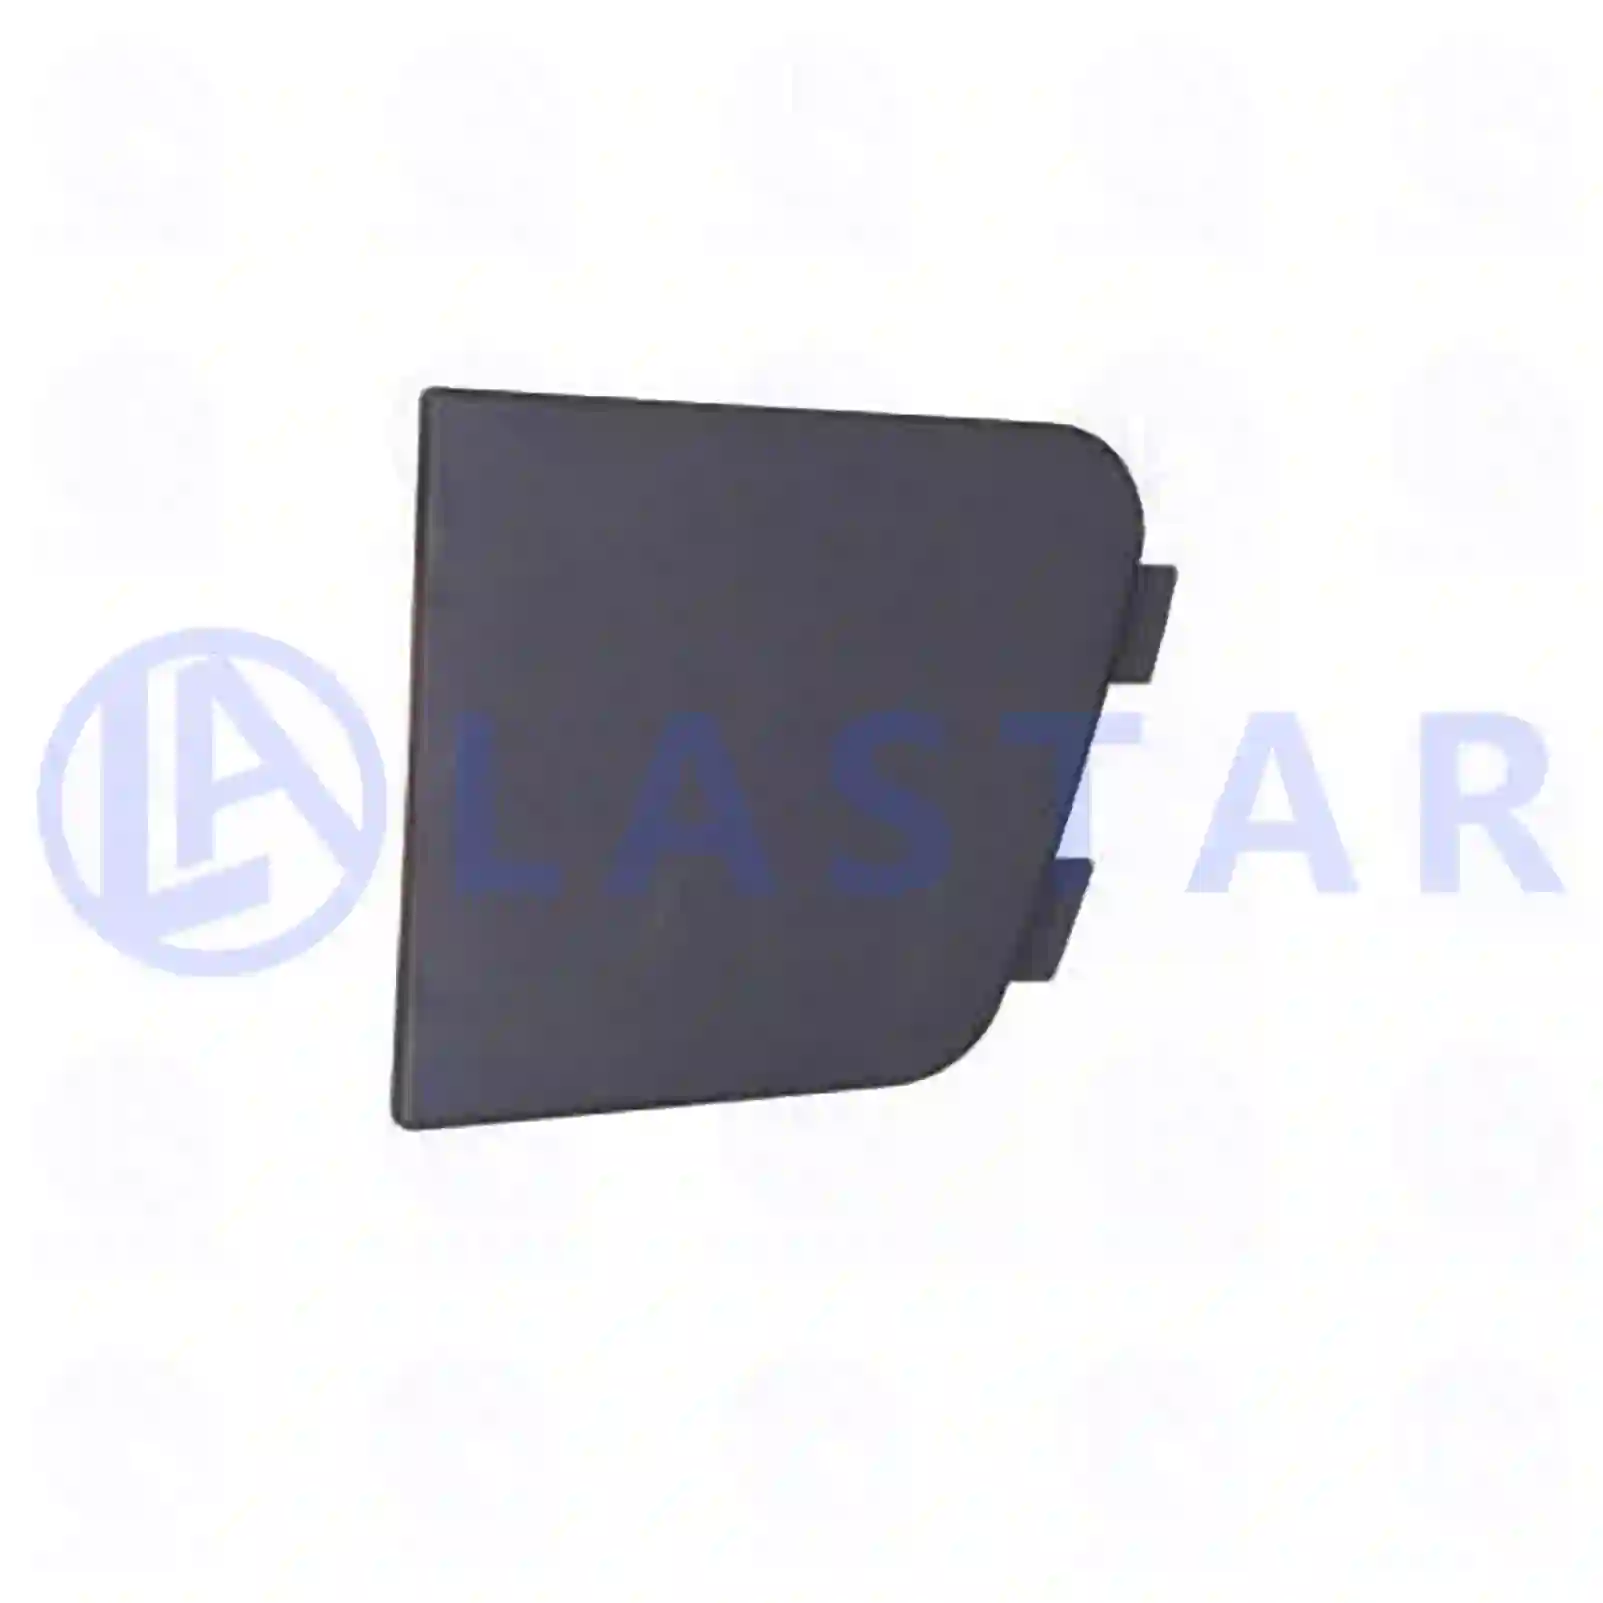 Cover, front grill, left, 77721034, 20529707, 3175547, ZG60453-0008 ||  77721034 Lastar Spare Part | Truck Spare Parts, Auotomotive Spare Parts Cover, front grill, left, 77721034, 20529707, 3175547, ZG60453-0008 ||  77721034 Lastar Spare Part | Truck Spare Parts, Auotomotive Spare Parts